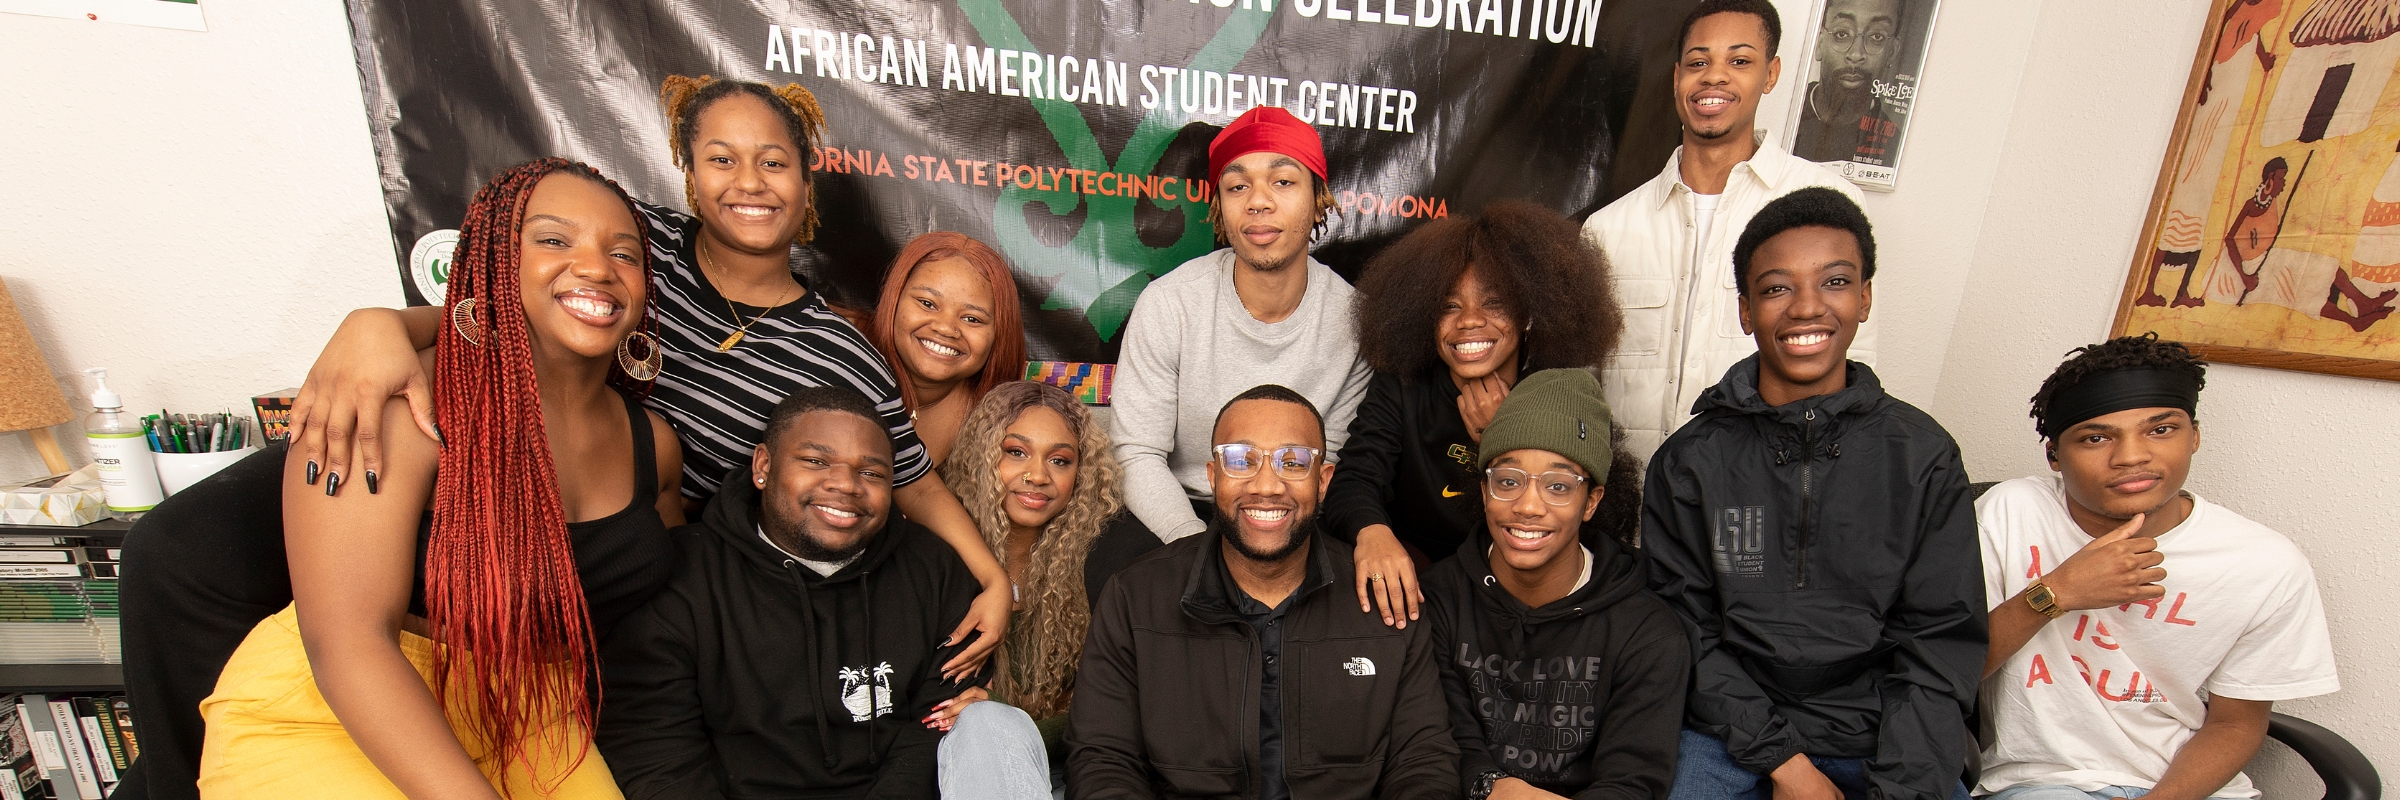 Students pose for the camera at the African American Student Center (AASC)